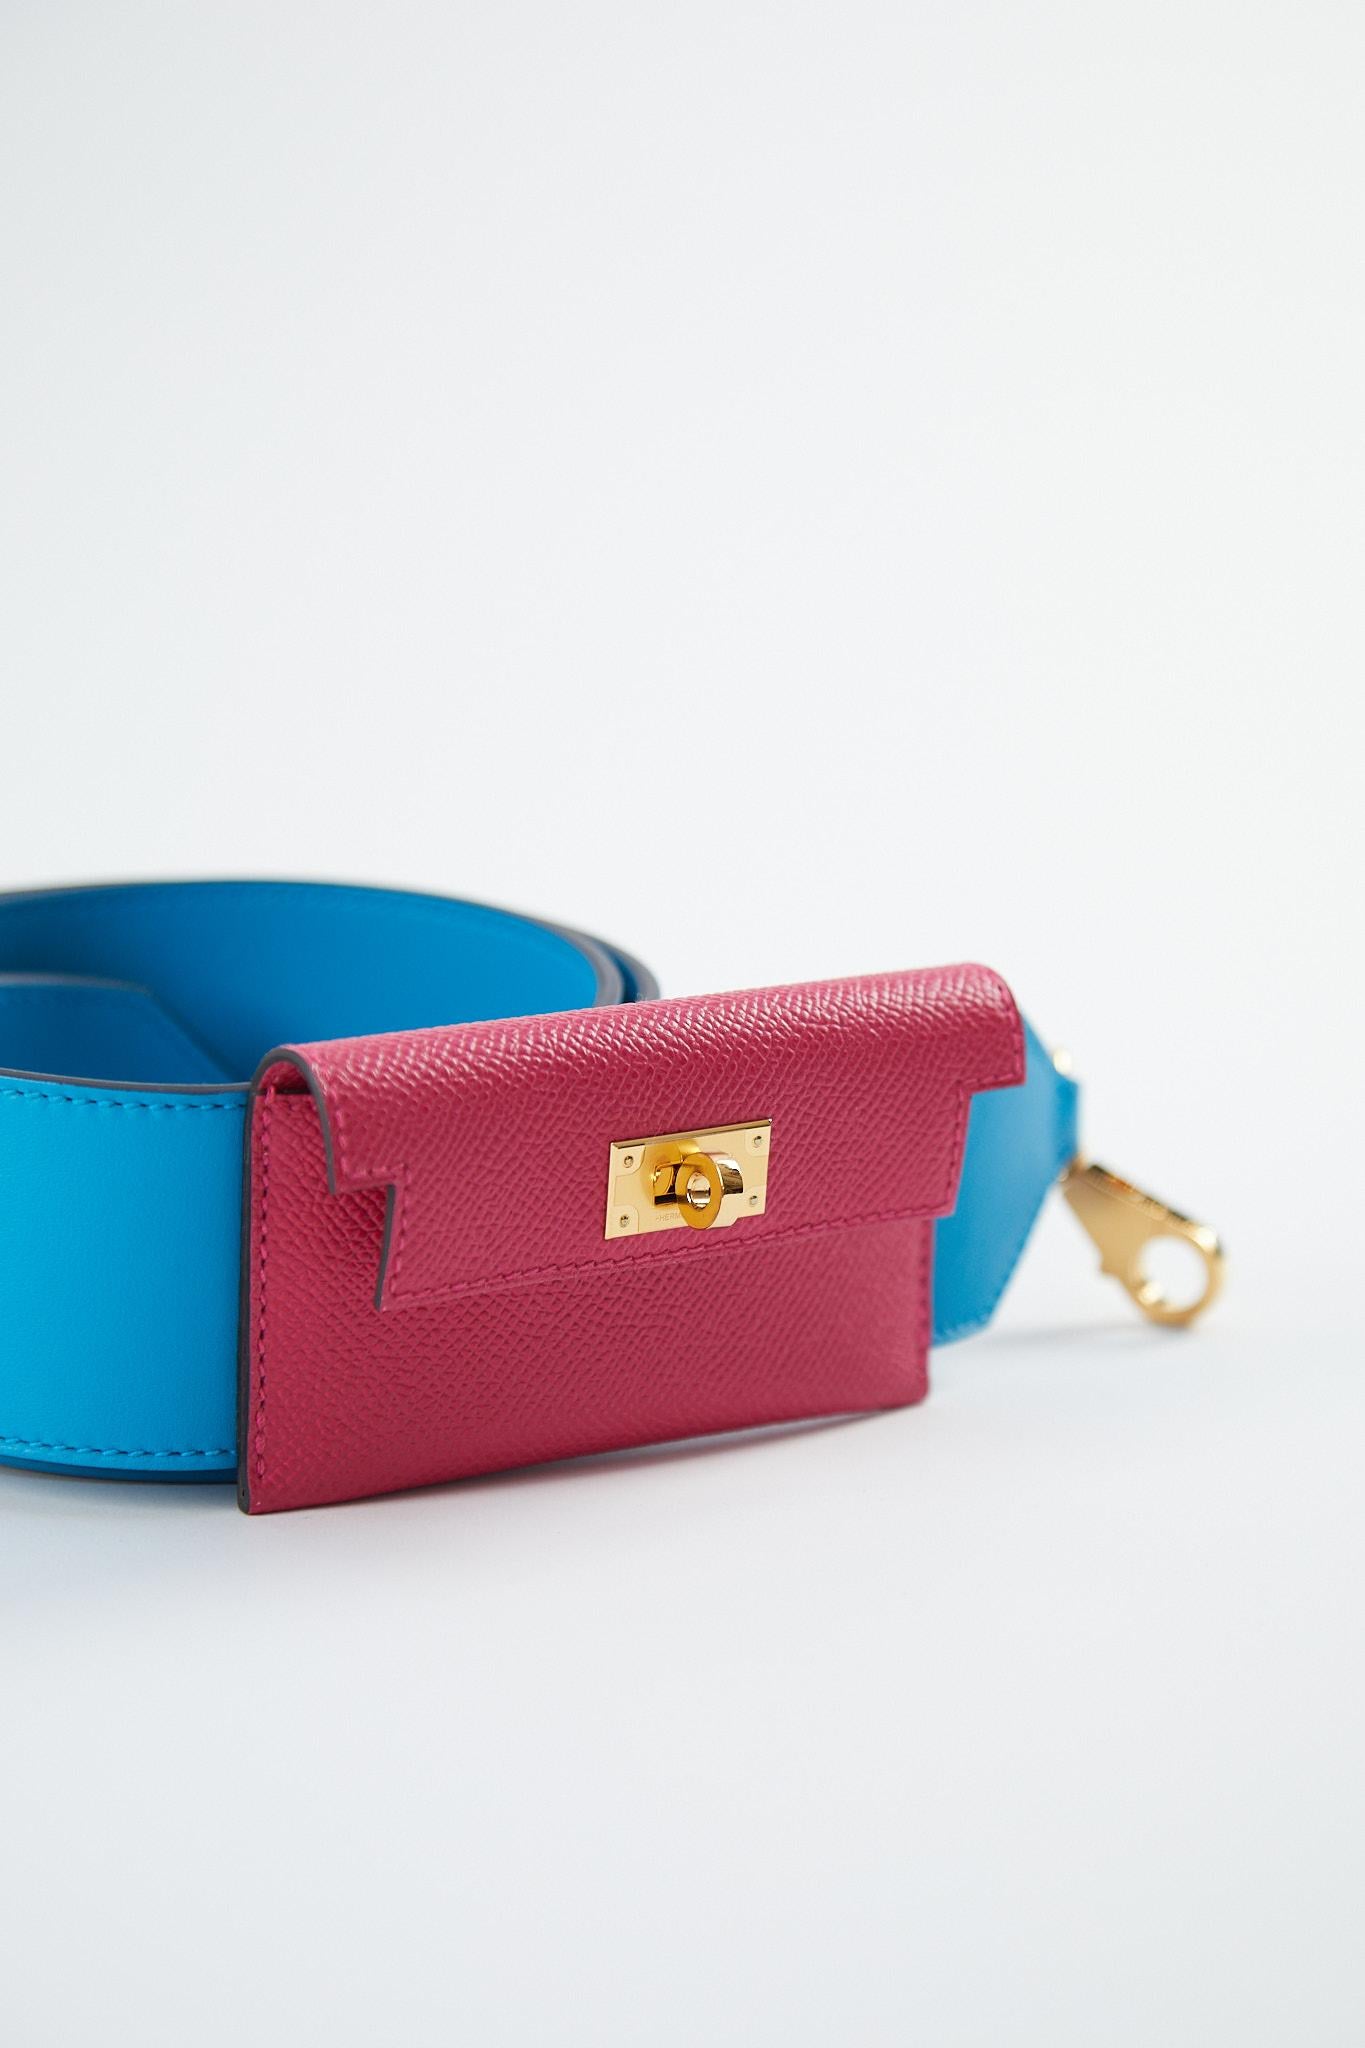 Hermès Kelly Pocket Strap 105cm in Blue Frida & Rose Mexico

Epsom and Swift Leather with Gold Hardware

Y Stamp / No receipt

Accompanied By: Hermes box, dustbag and ribbon

Measurements: L 42